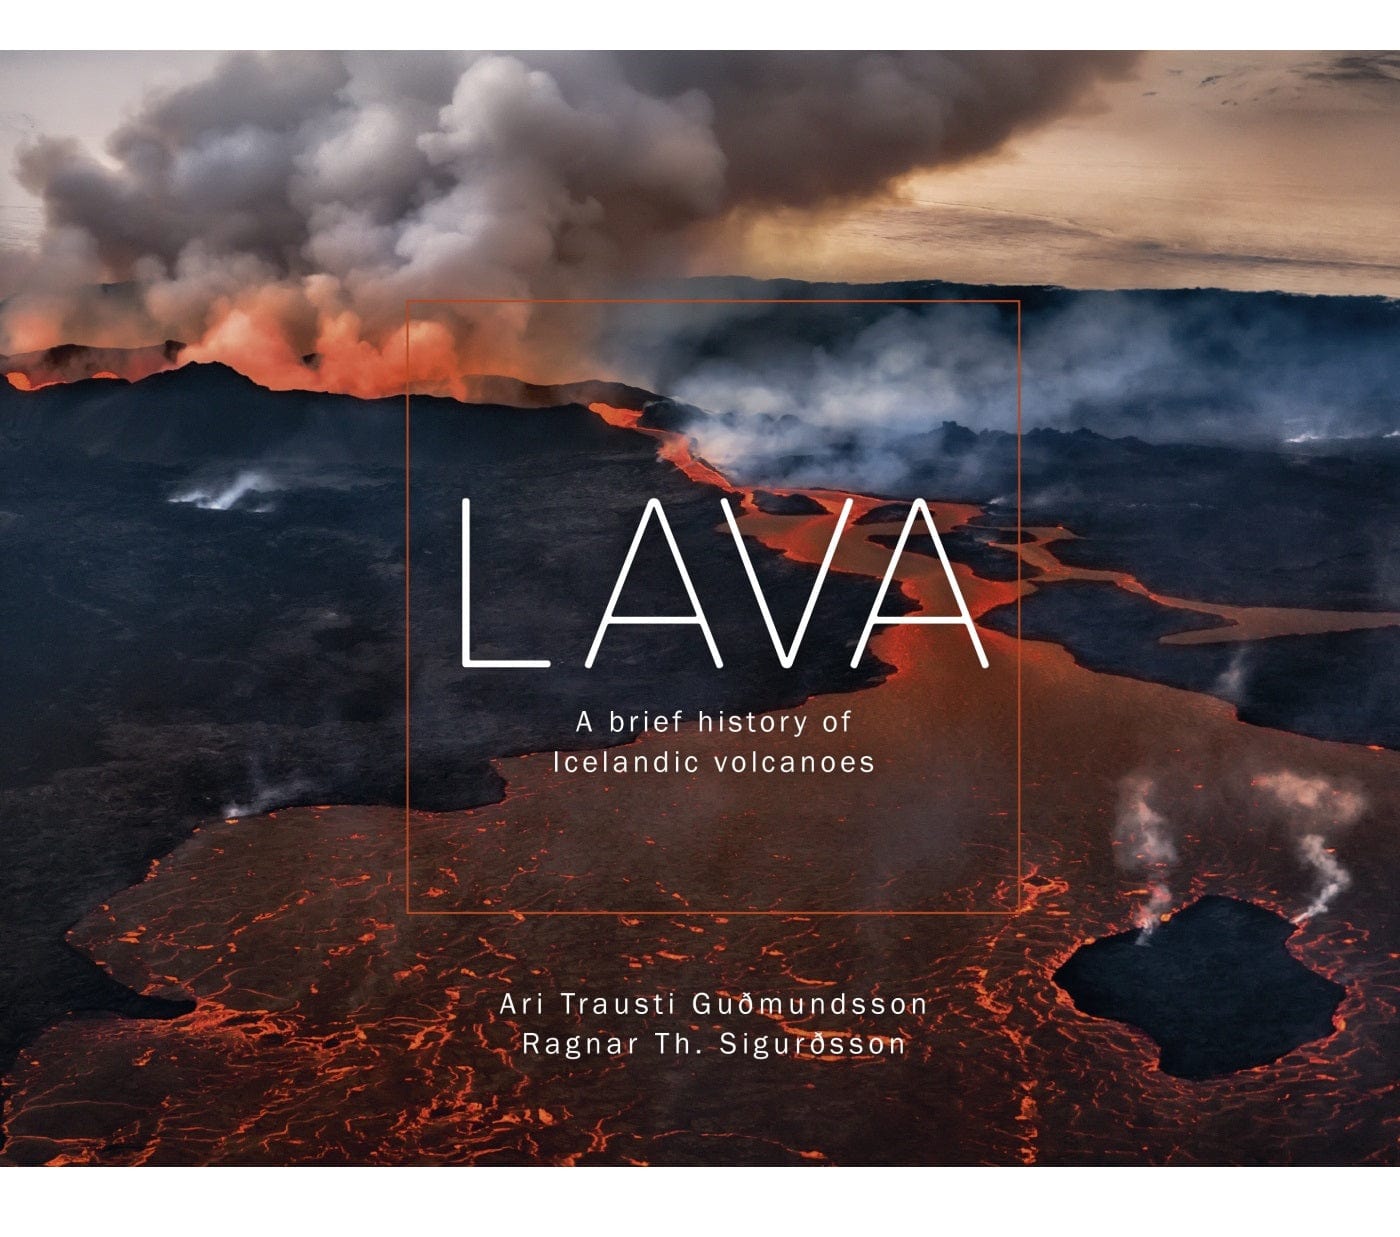 Lava: A Brief History of Icelandic Volcanoes - Hardcover book - The Icelandic Store